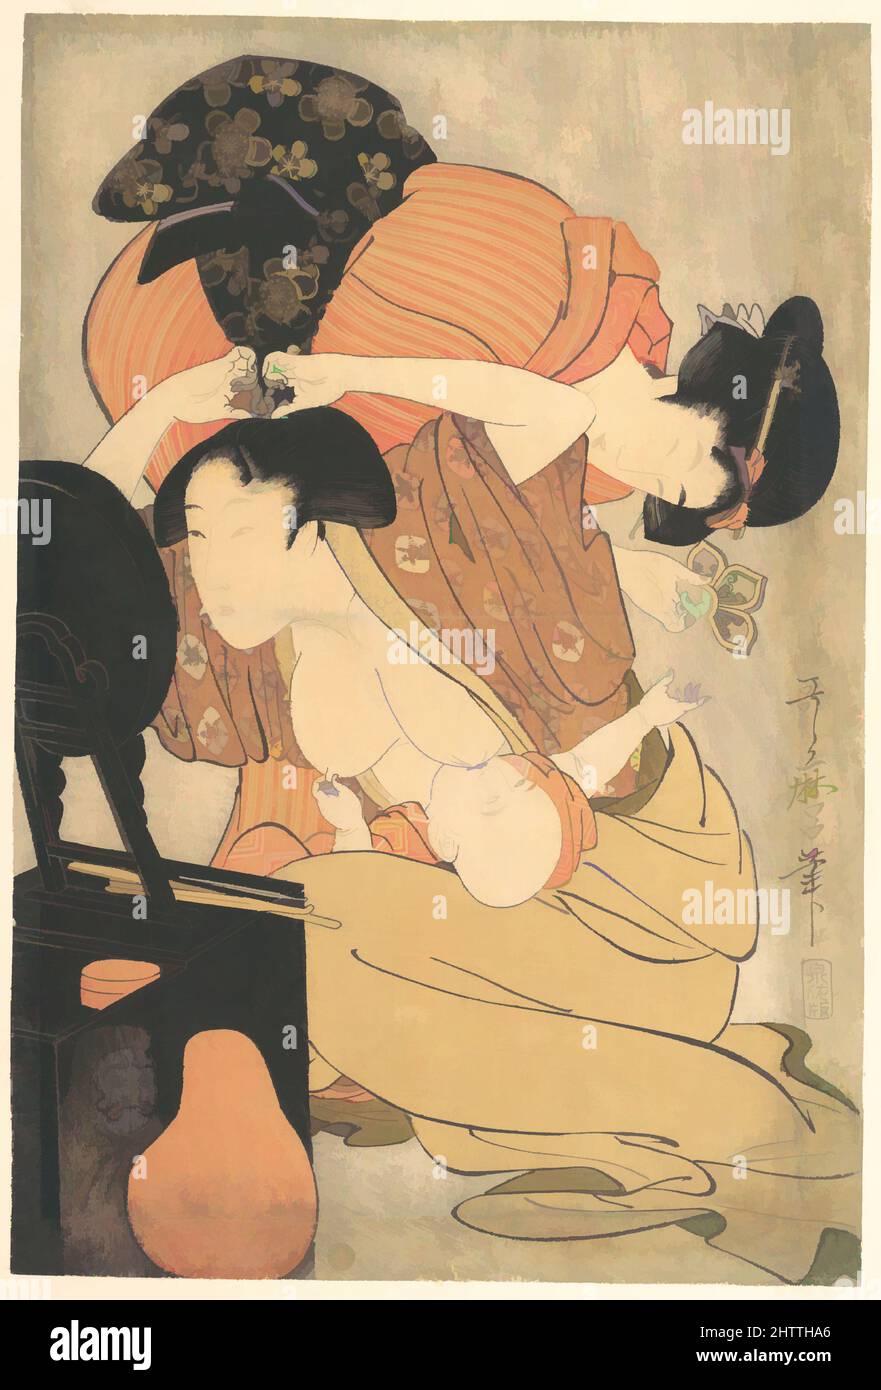 Art inspired by Mother and Child, Edo period (1615–1868), ca. 1793, Japan, Polychrome woodblock print; ink and color on paper, H. 14 5/8 in. (37.1 cm); W. 10 in. (25.4 cm), Prints, Kitagawa Utamaro (Japanese, 1753?–1806), Utamaro composed this two image with considerable skill and, Classic works modernized by Artotop with a splash of modernity. Shapes, color and value, eye-catching visual impact on art. Emotions through freedom of artworks in a contemporary way. A timeless message pursuing a wildly creative new direction. Artists turning to the digital medium and creating the Artotop NFT Stock Photo